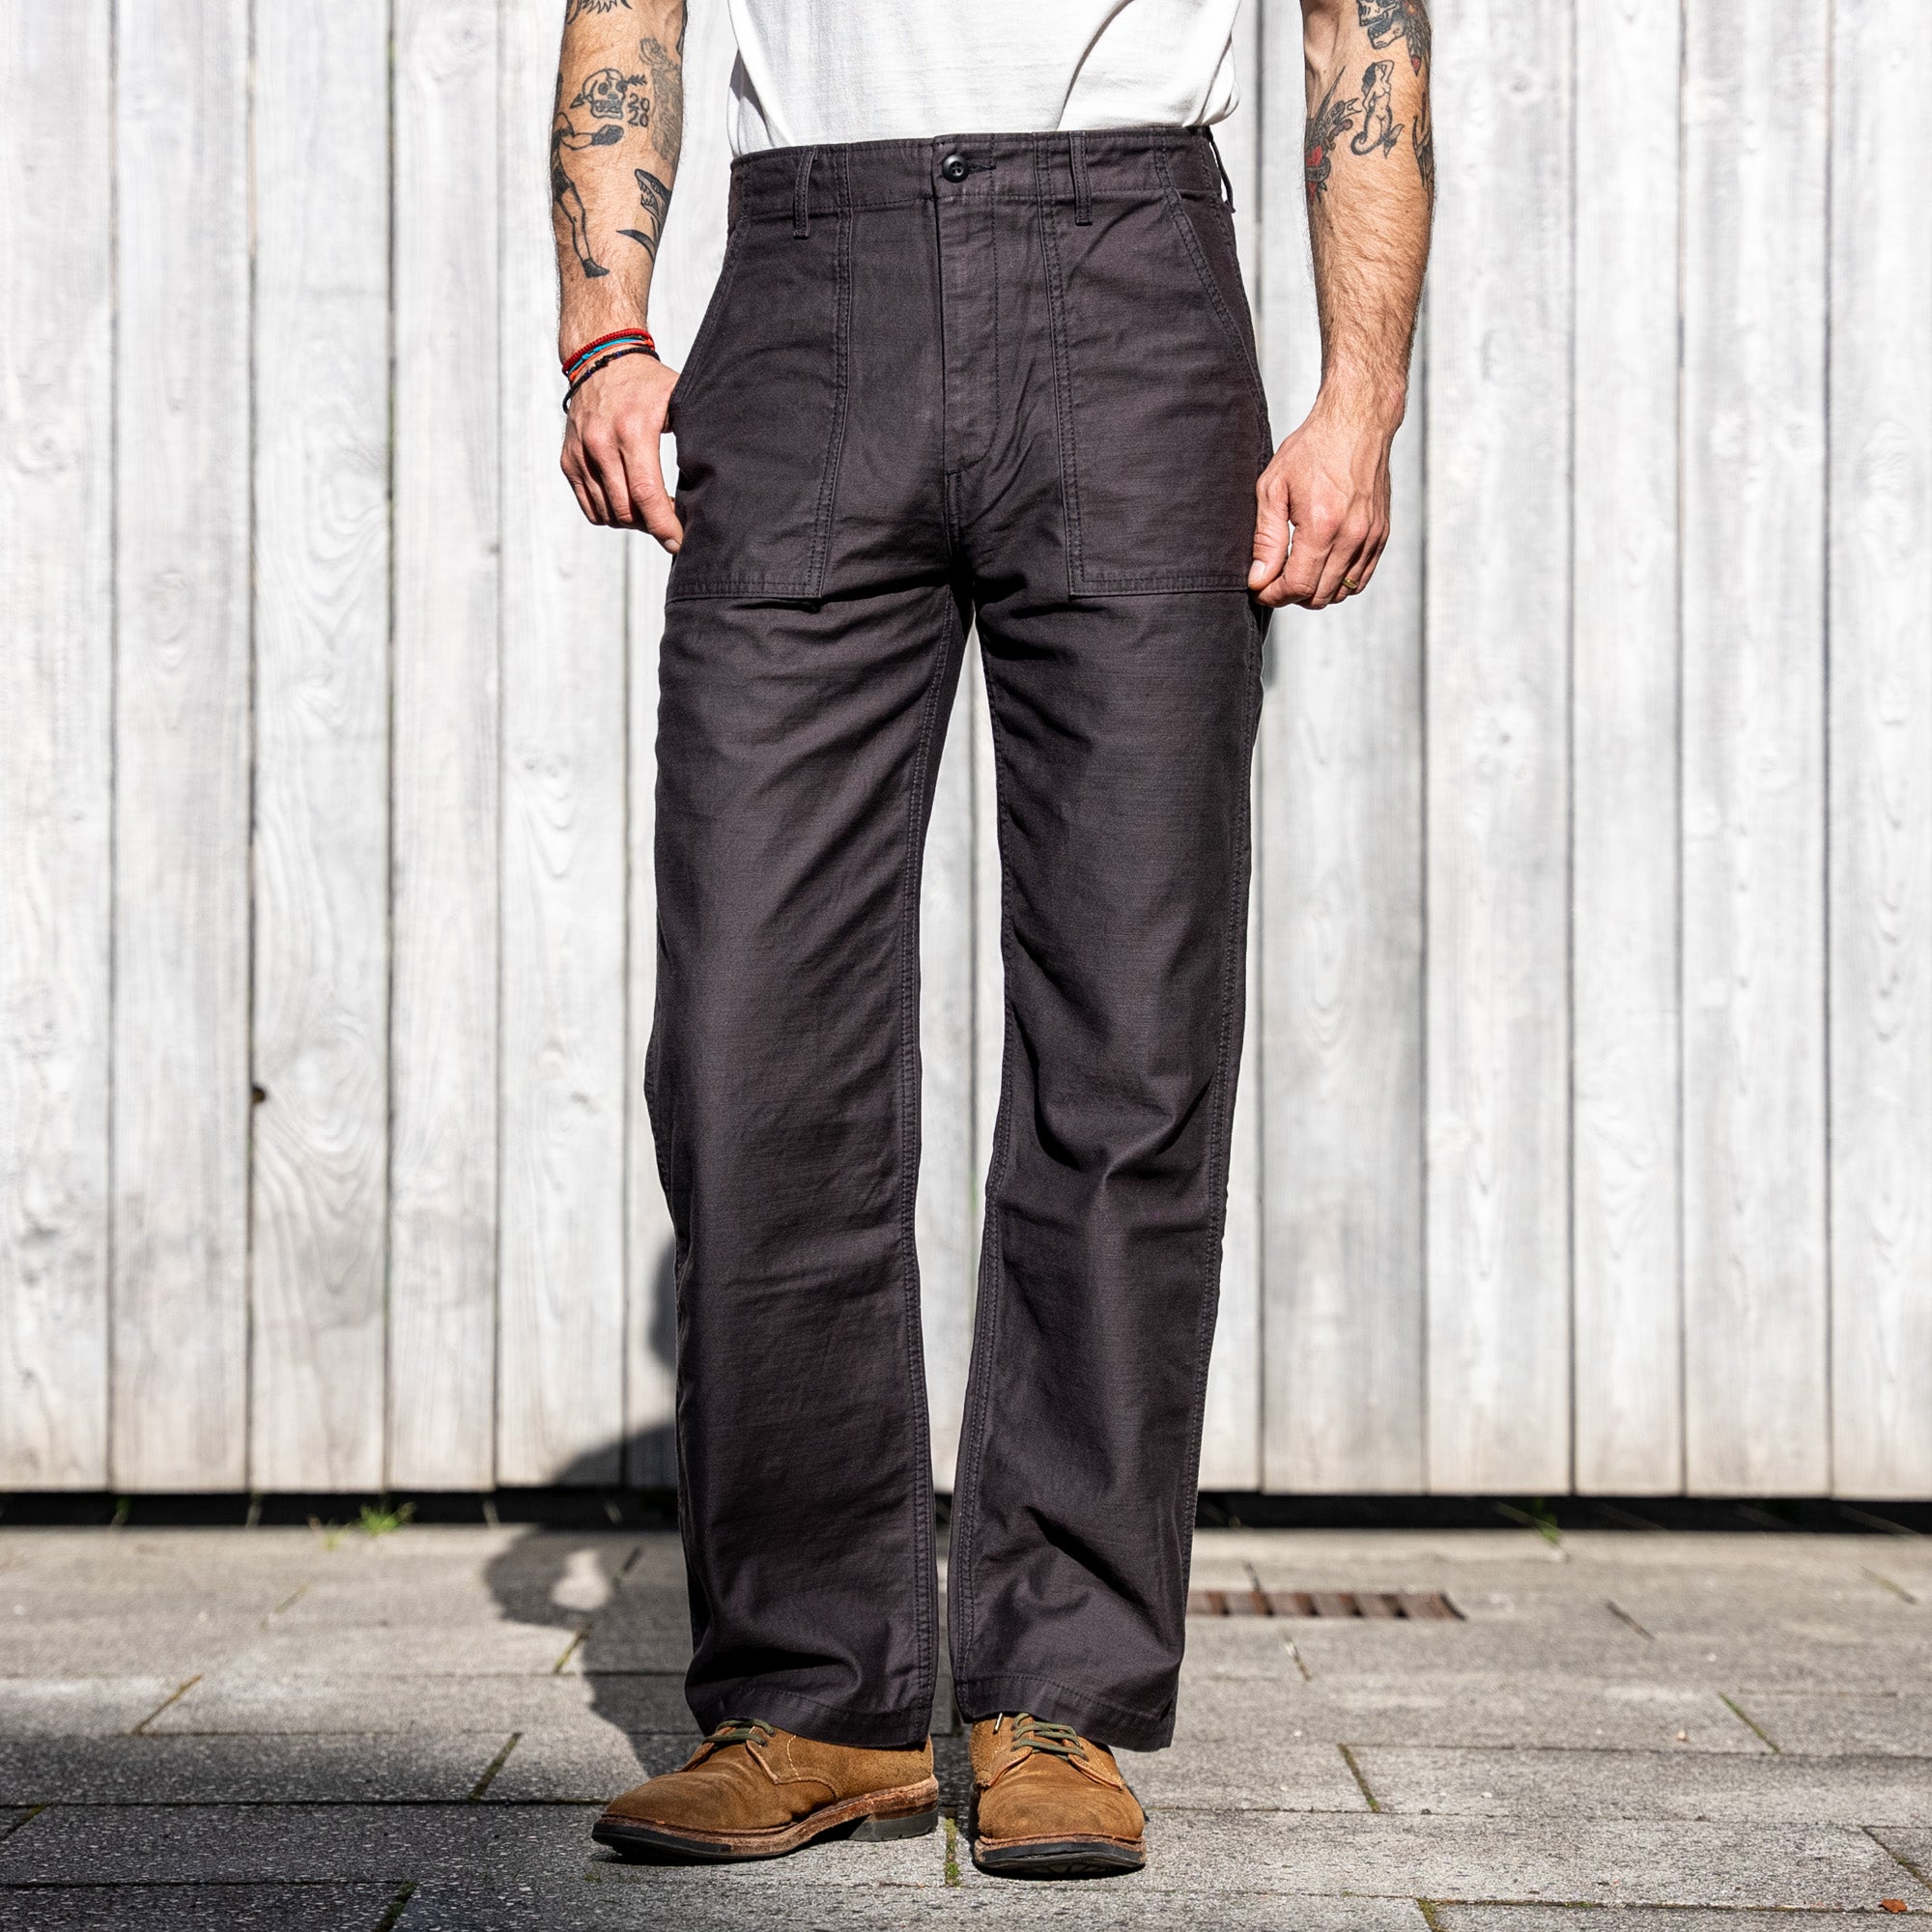 orSlow US ARMY SLIM FIT FATIGUE PANTS (black stone) – unexpected store